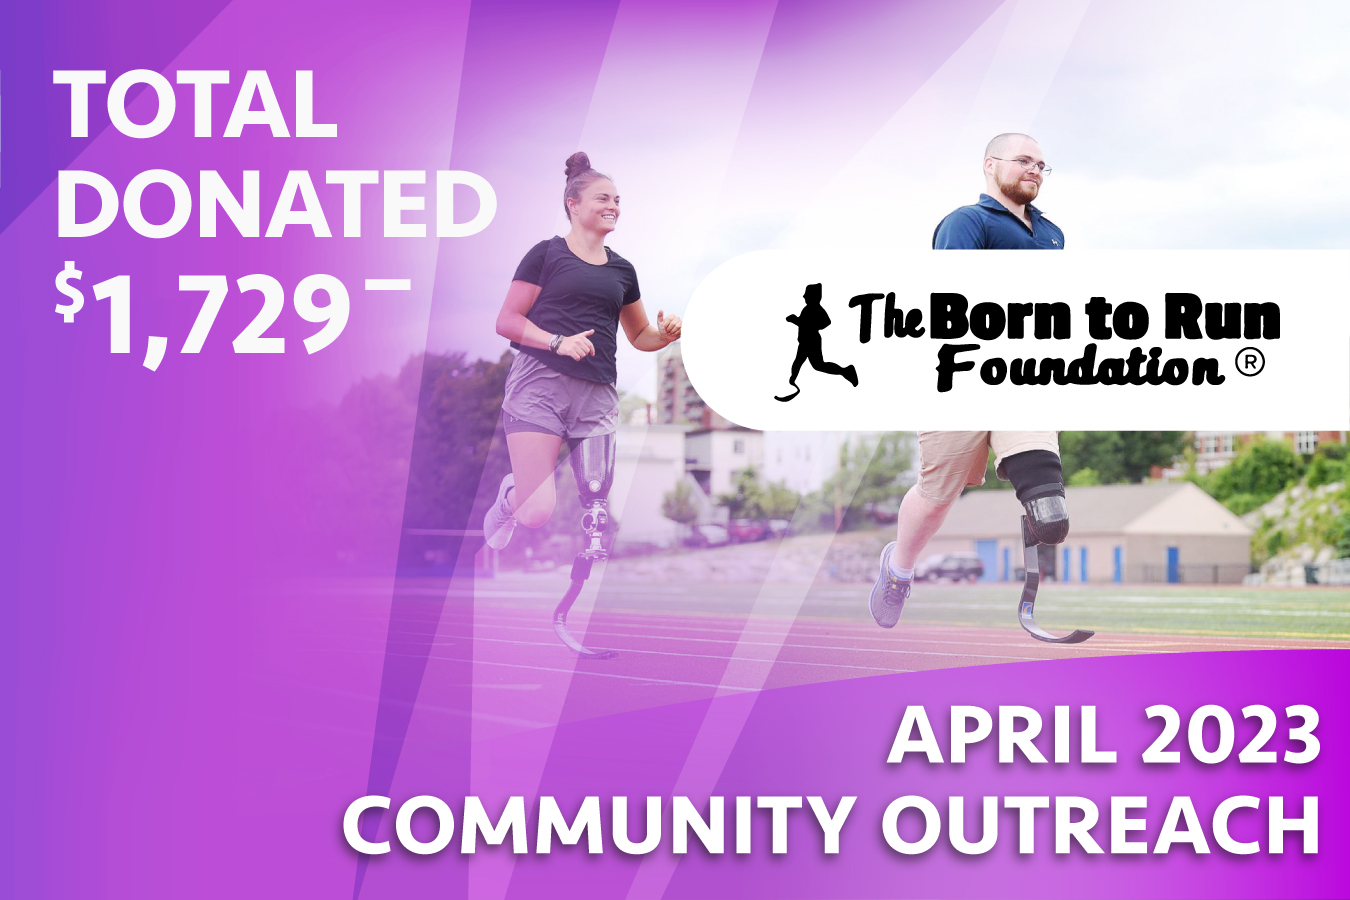 Graphic promoting our April 2023 Community Outreach benefactor - Born To Run Foundation.